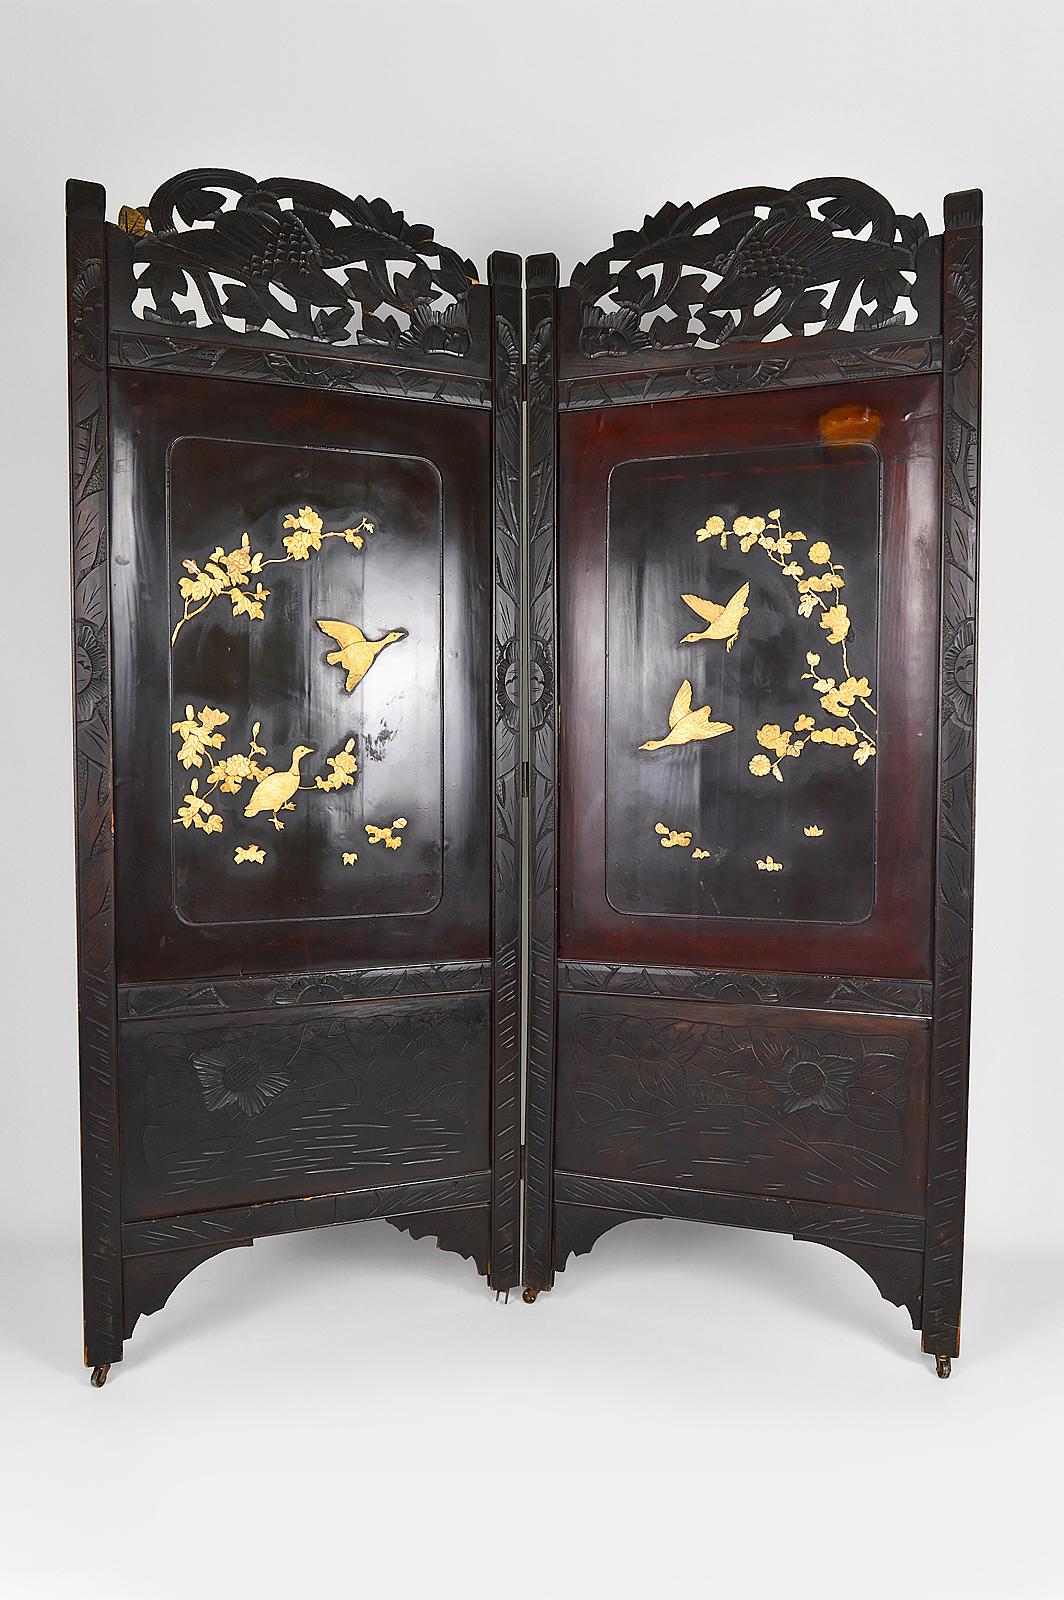 Folding creen with 2 panels in carved, inlaid and lacquered wood.

The upper and lower parts are carved with birds and foliage / leaves.
The central panels are inlaid on the front side (floral and animal marquetry) and painted on the back side